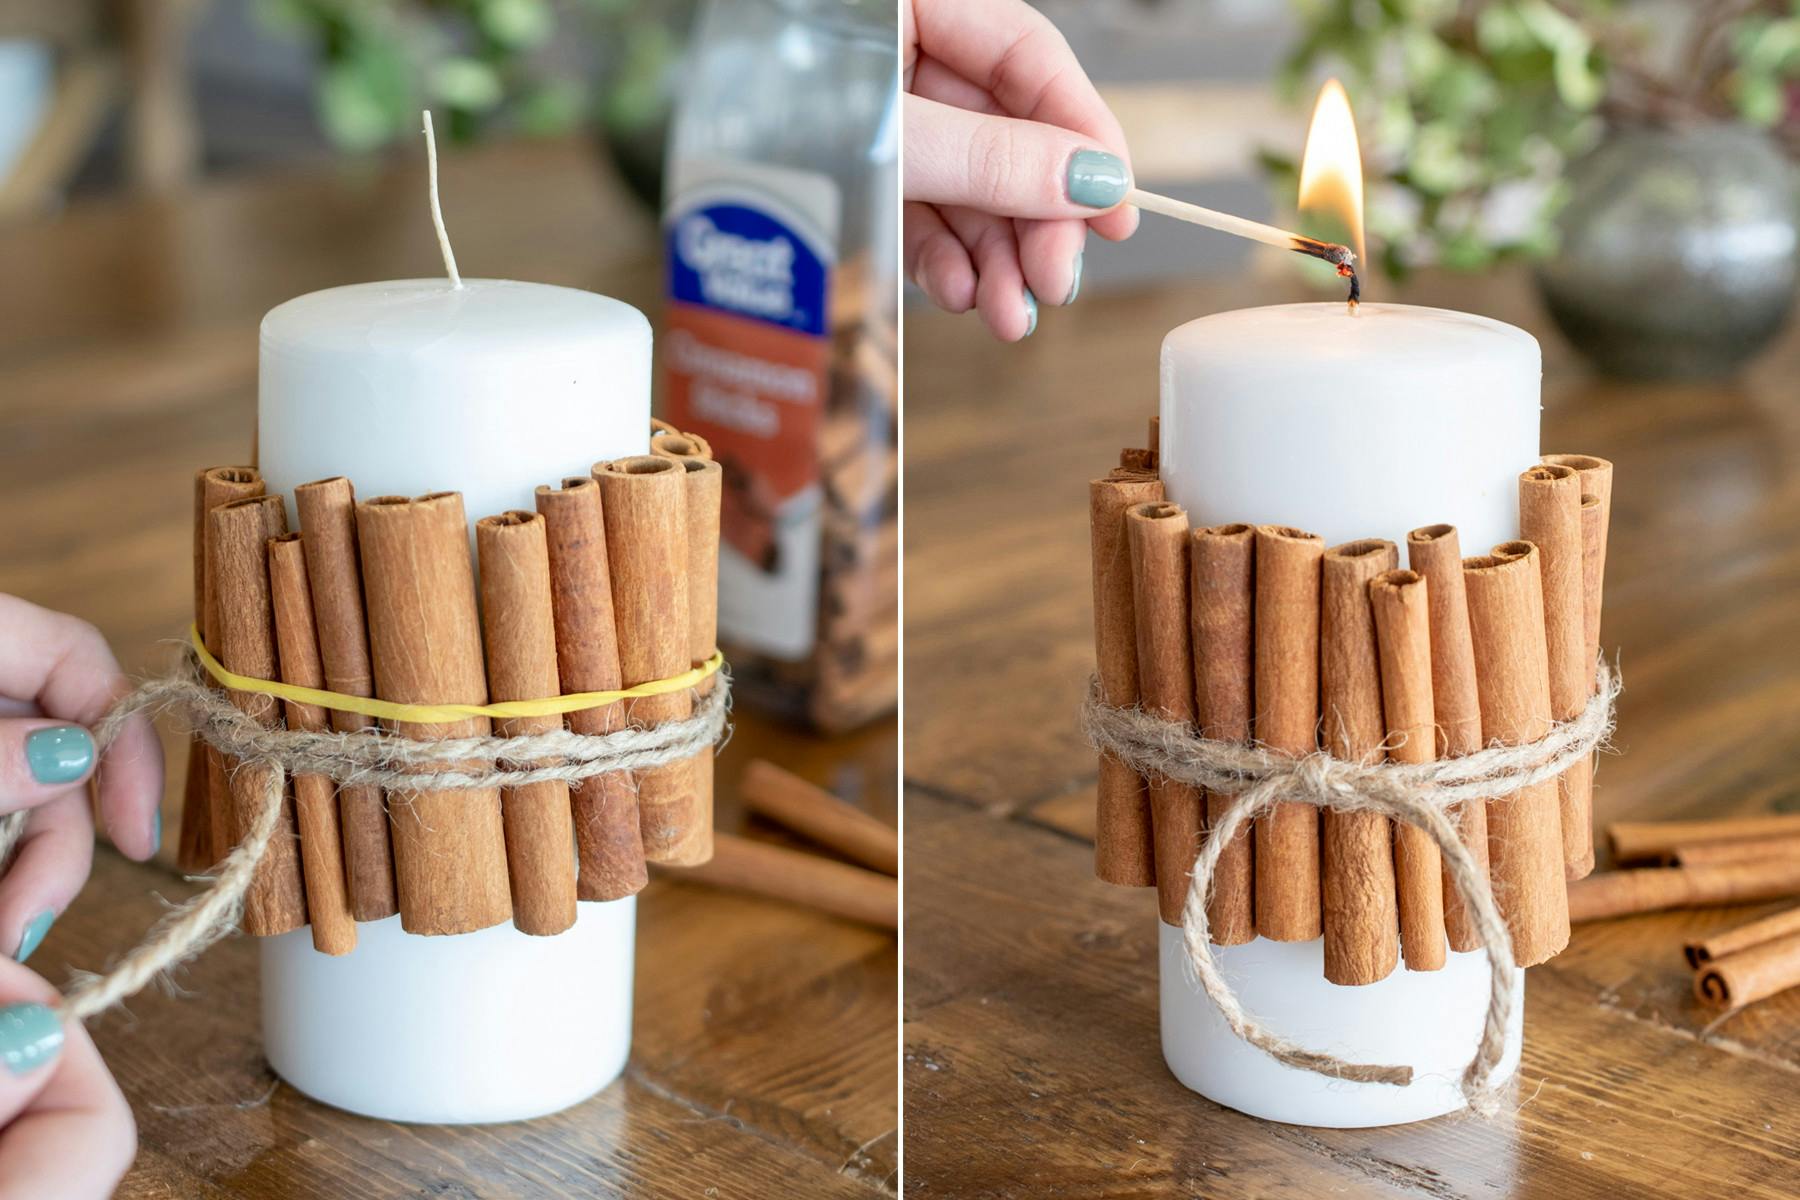 Woman tying twine around cinnamon sticks that are wrapped around a candle.